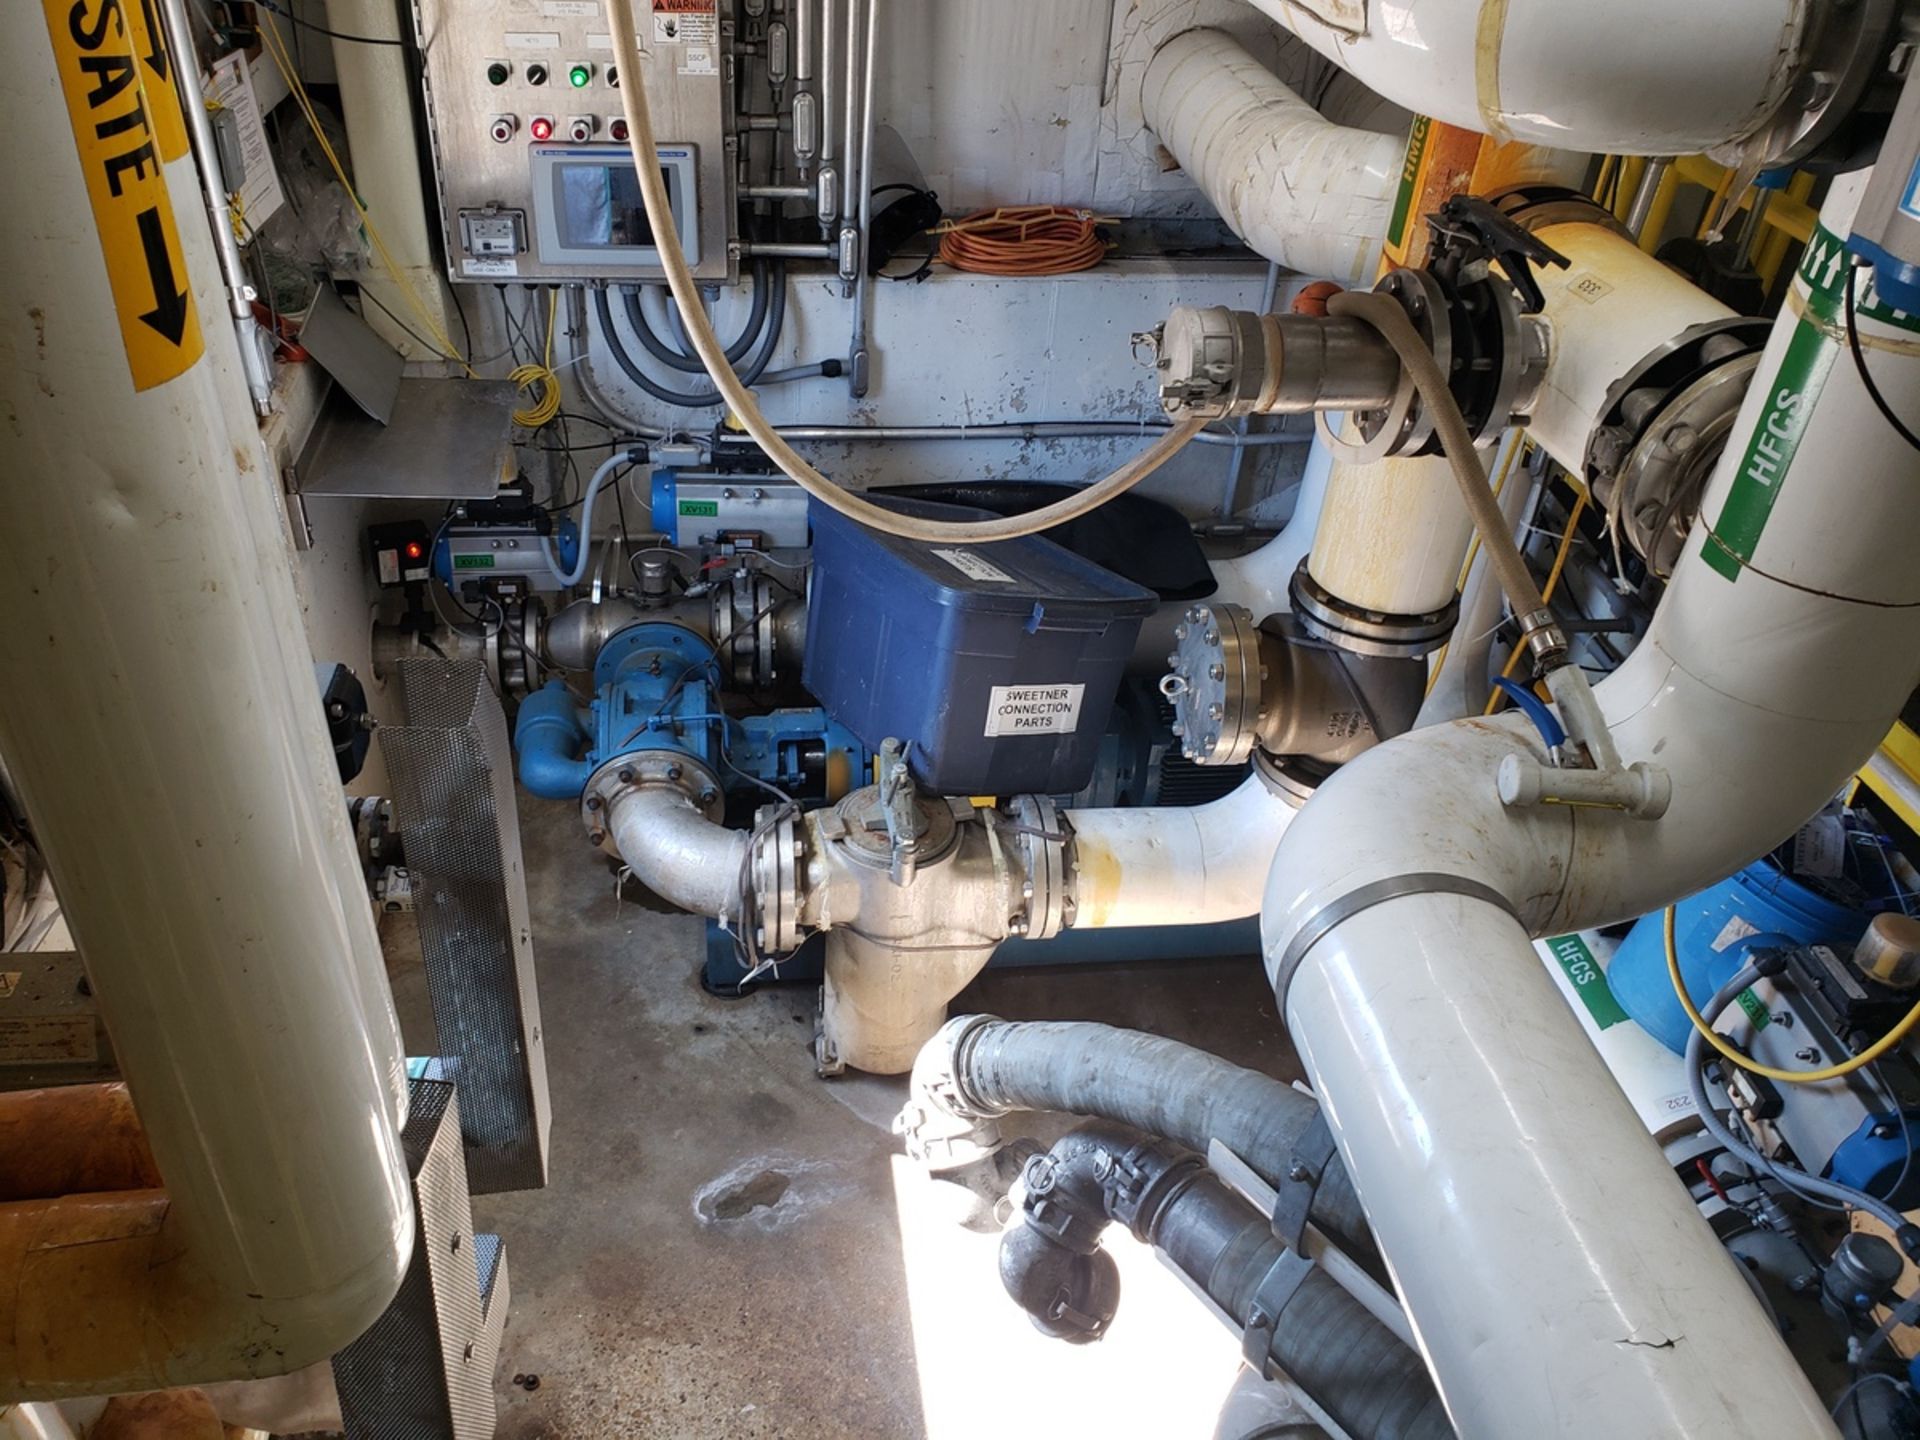 Contents of Corn Syrup Pumping/Control Room | Rig Fee $3500 - Image 2 of 12